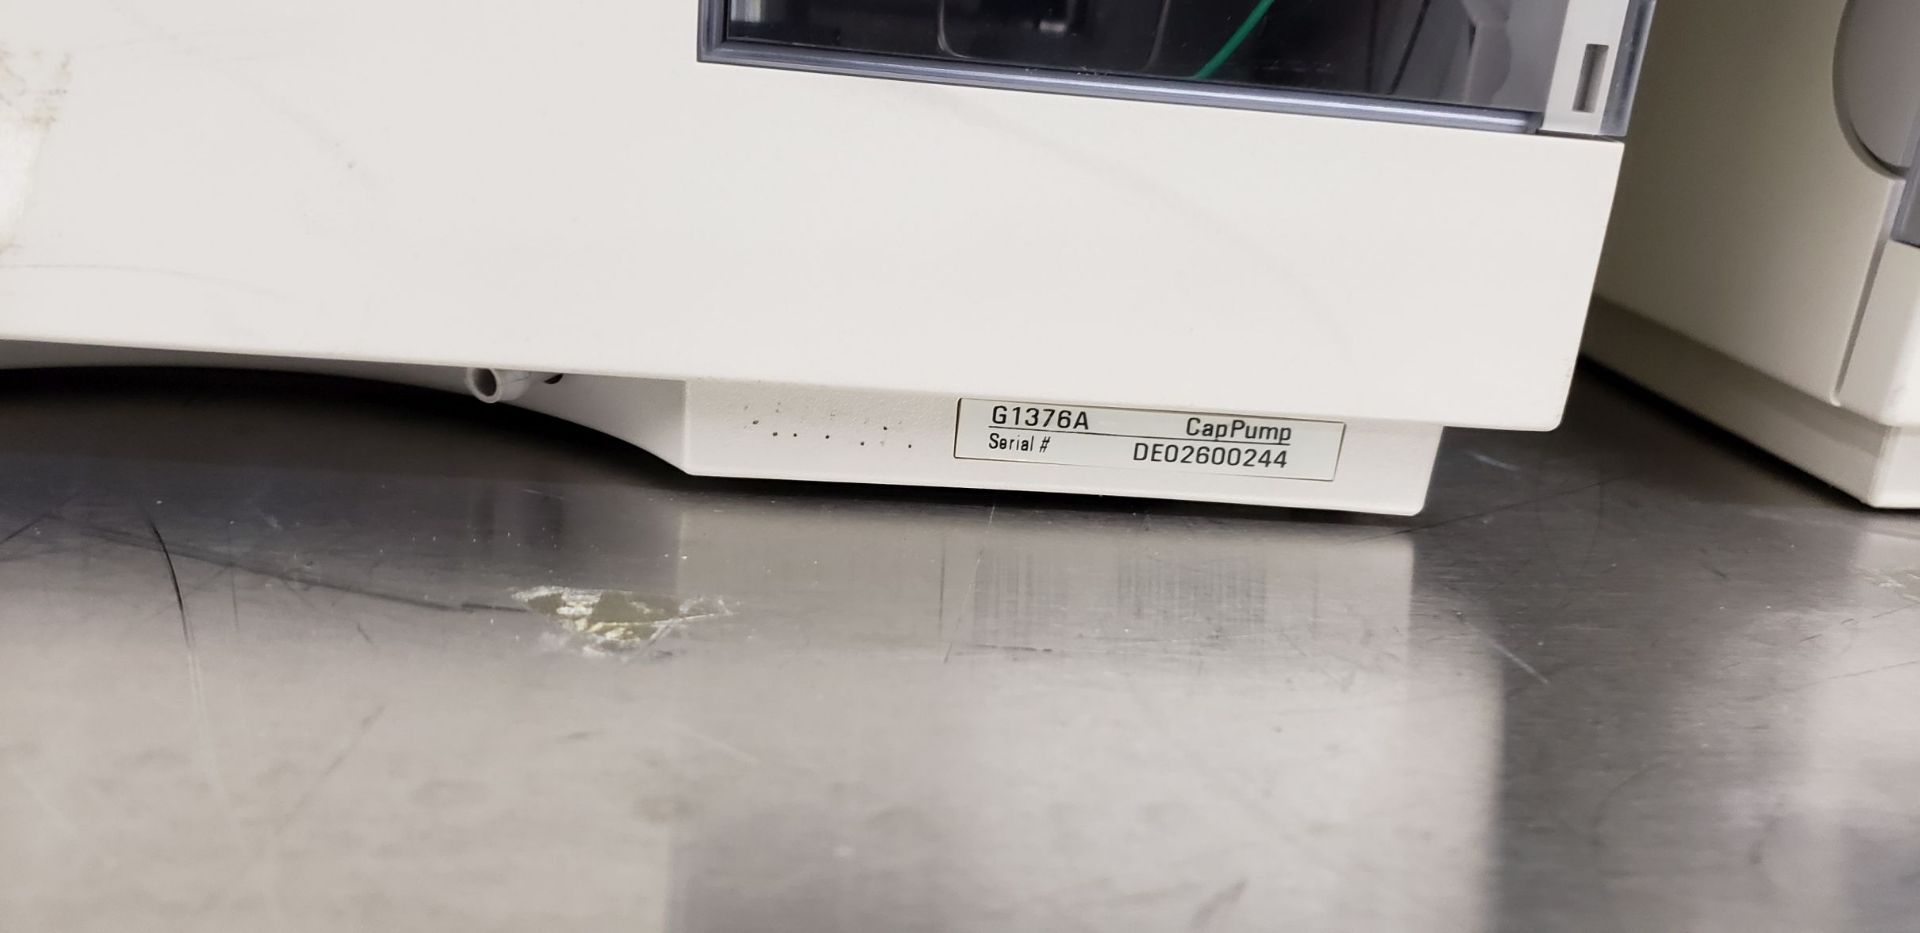 Agilent HPLC System, 1100 Series - Image 26 of 34